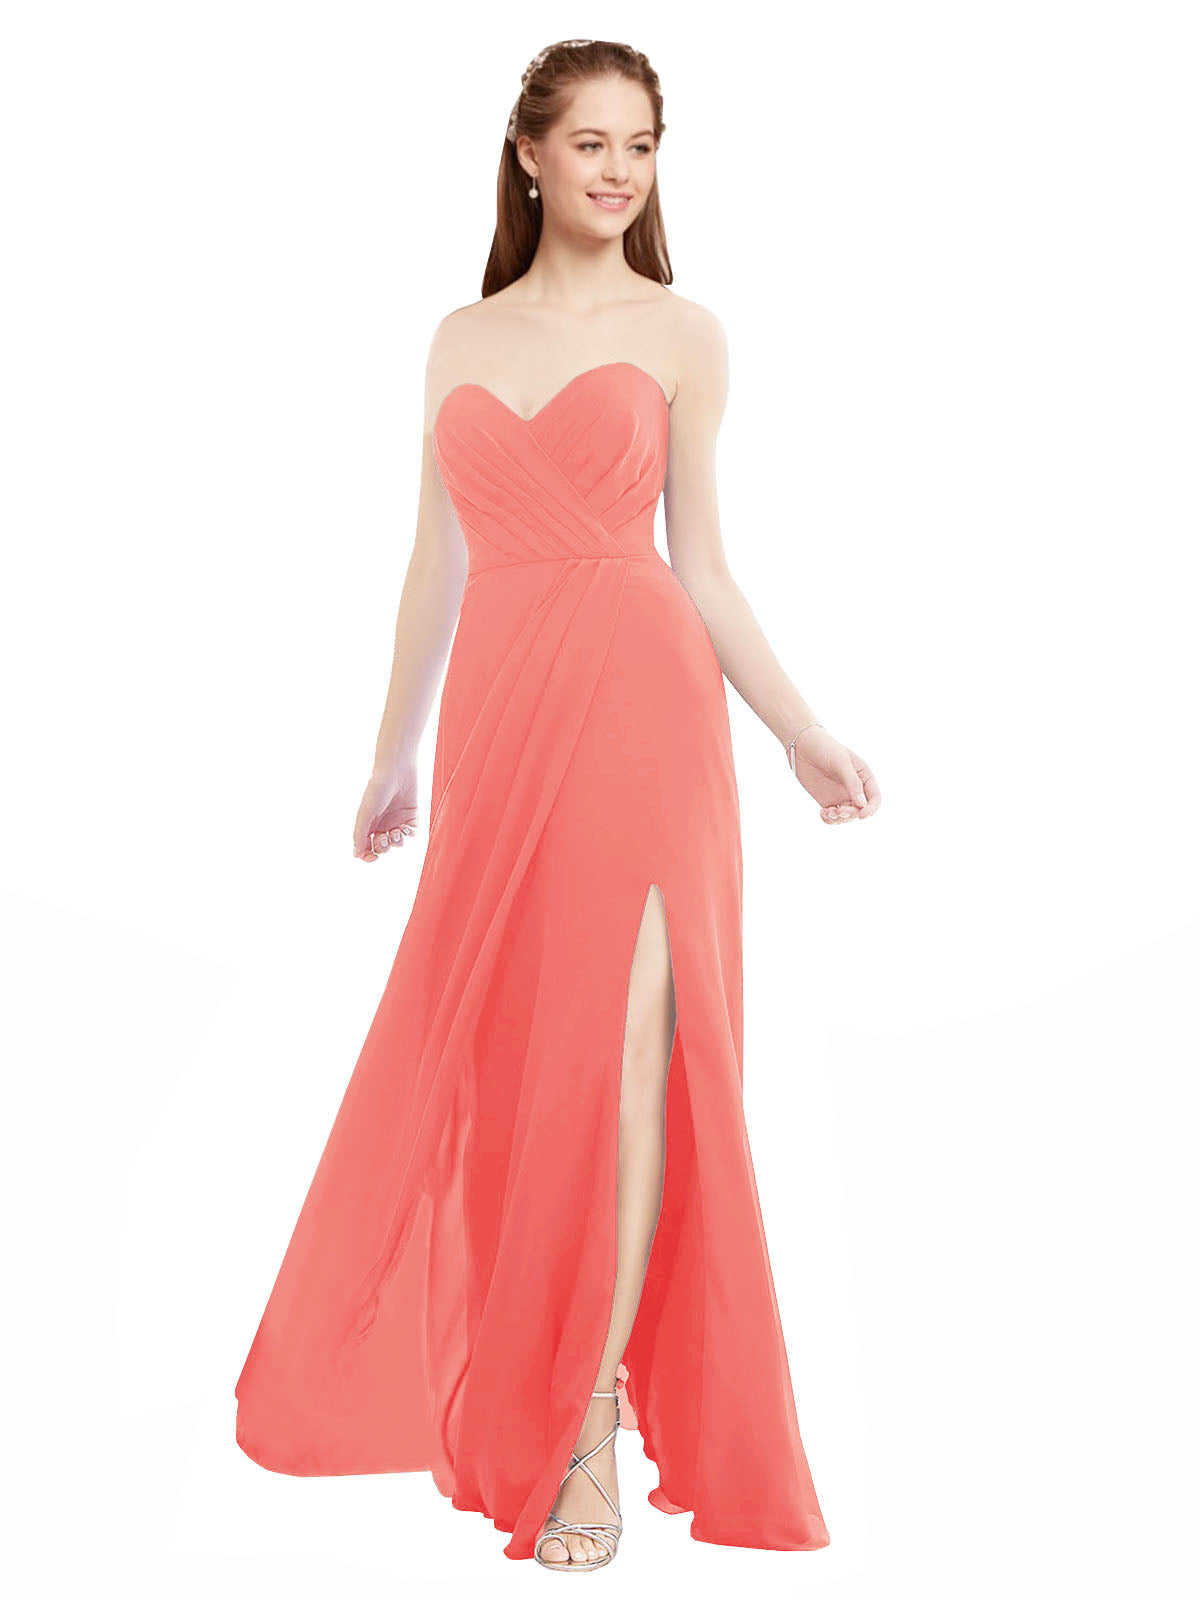 Coral A-Line Sweetheart Strapless Sleeveless Long Bridesmaid Dress Meadow